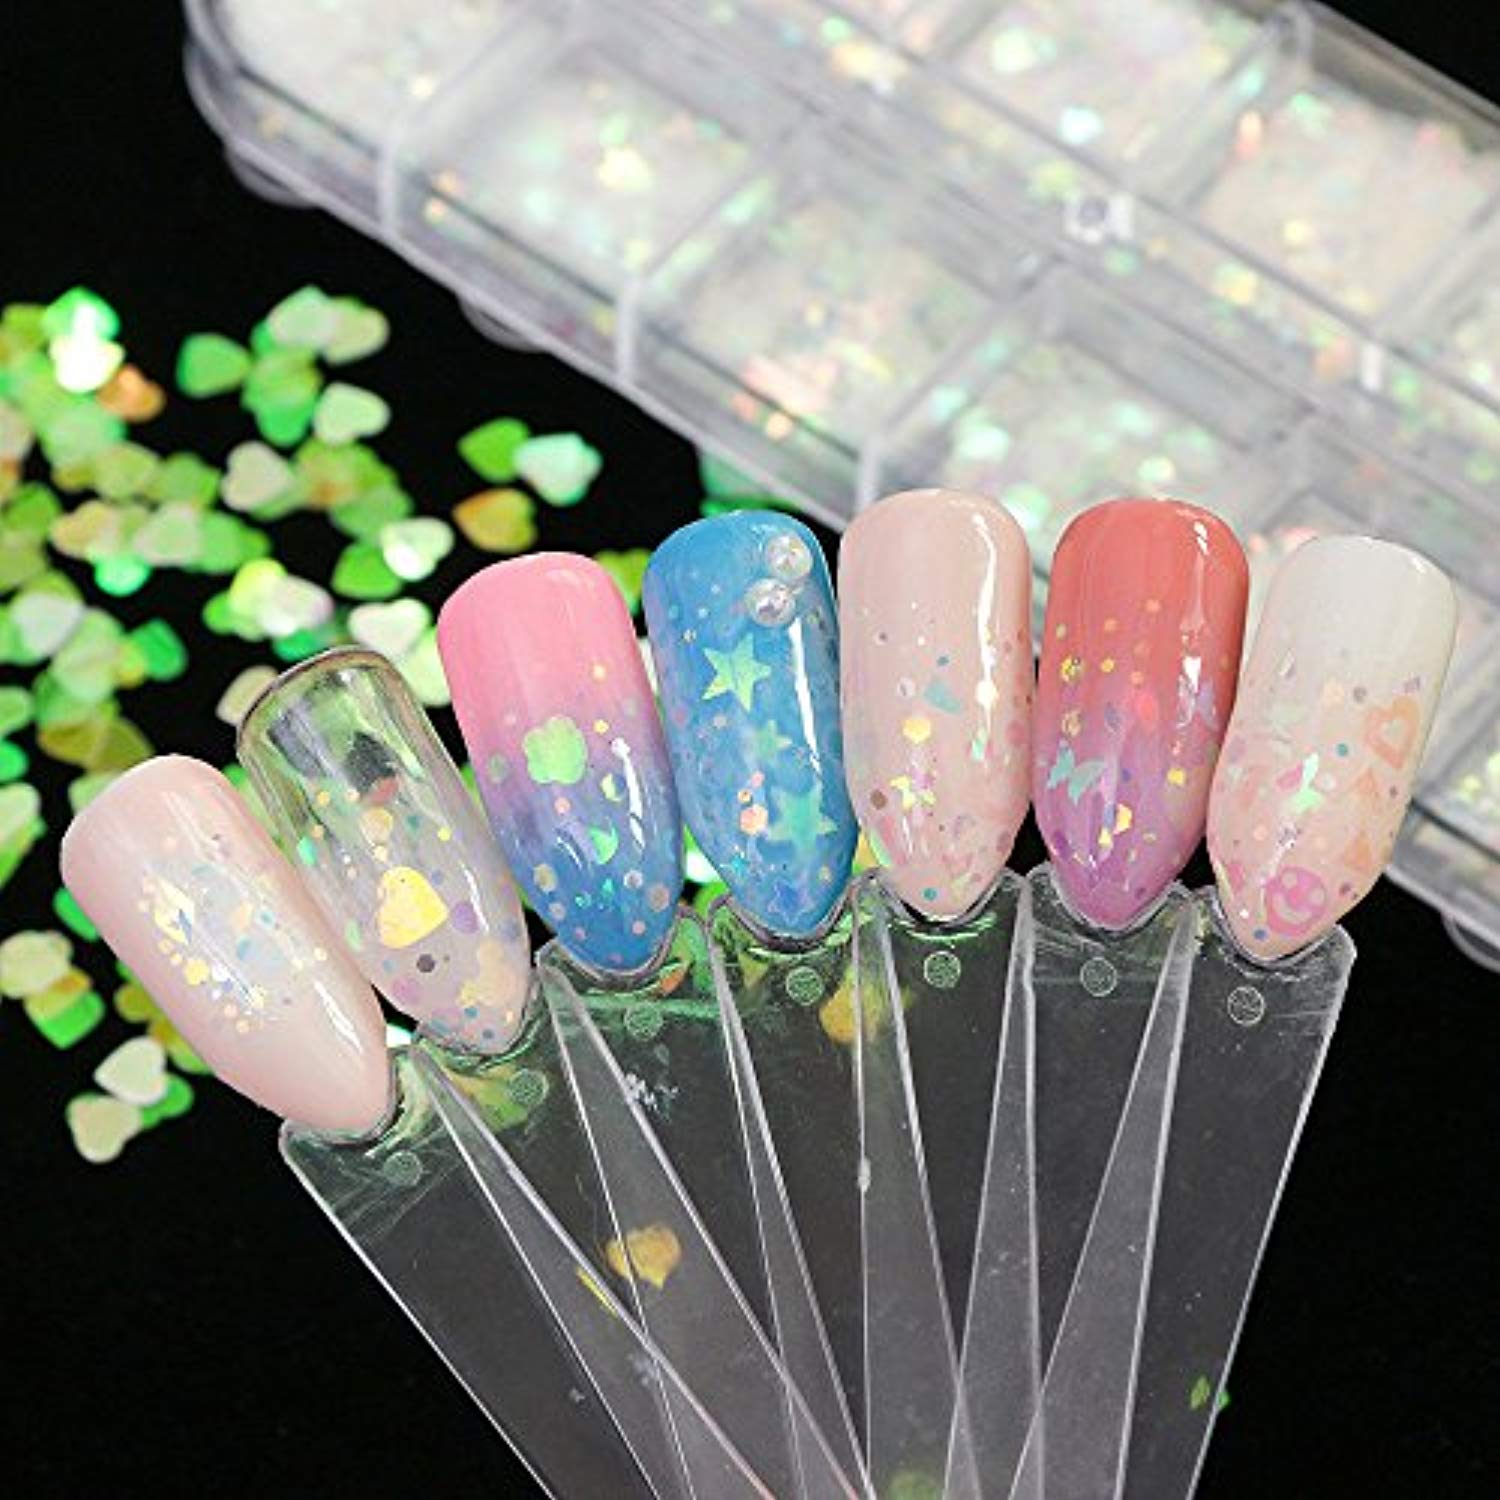 12 Colors Pink White Snowflake Nail Sequin 1 Box Holographic